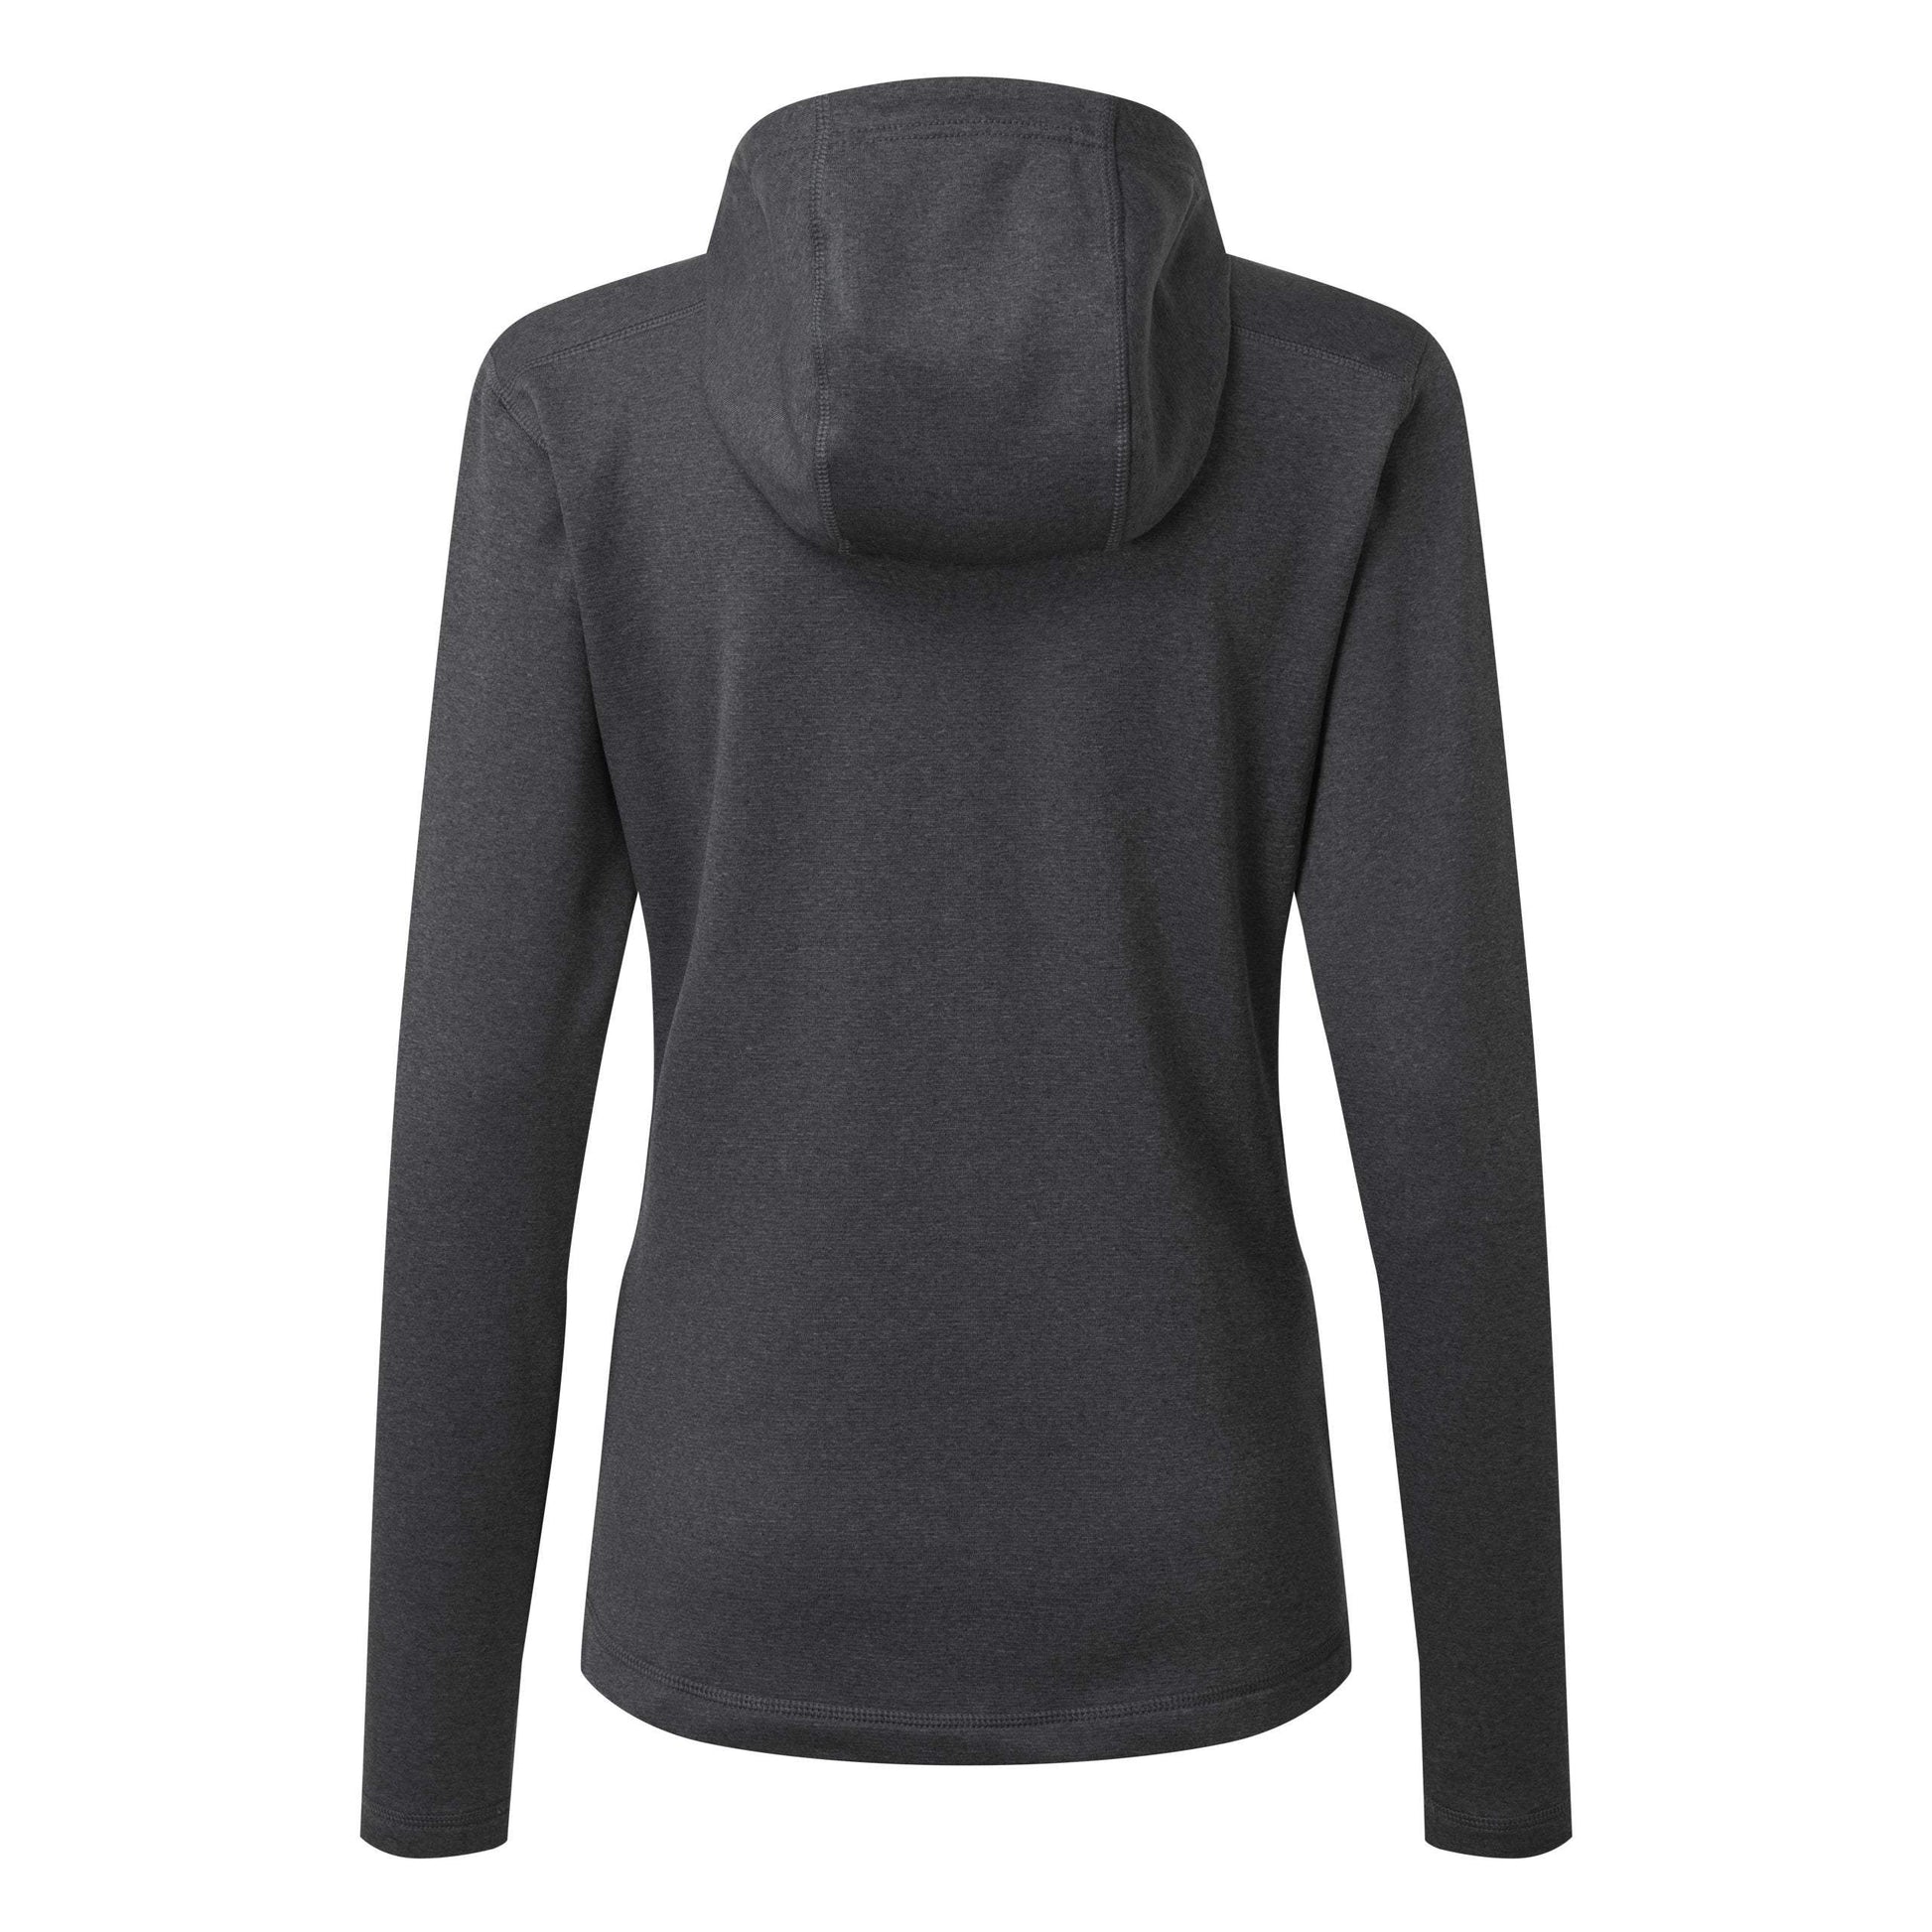 Women’s Geon Hoody by RAB - The Luxury Promotional Gifts Company Limited